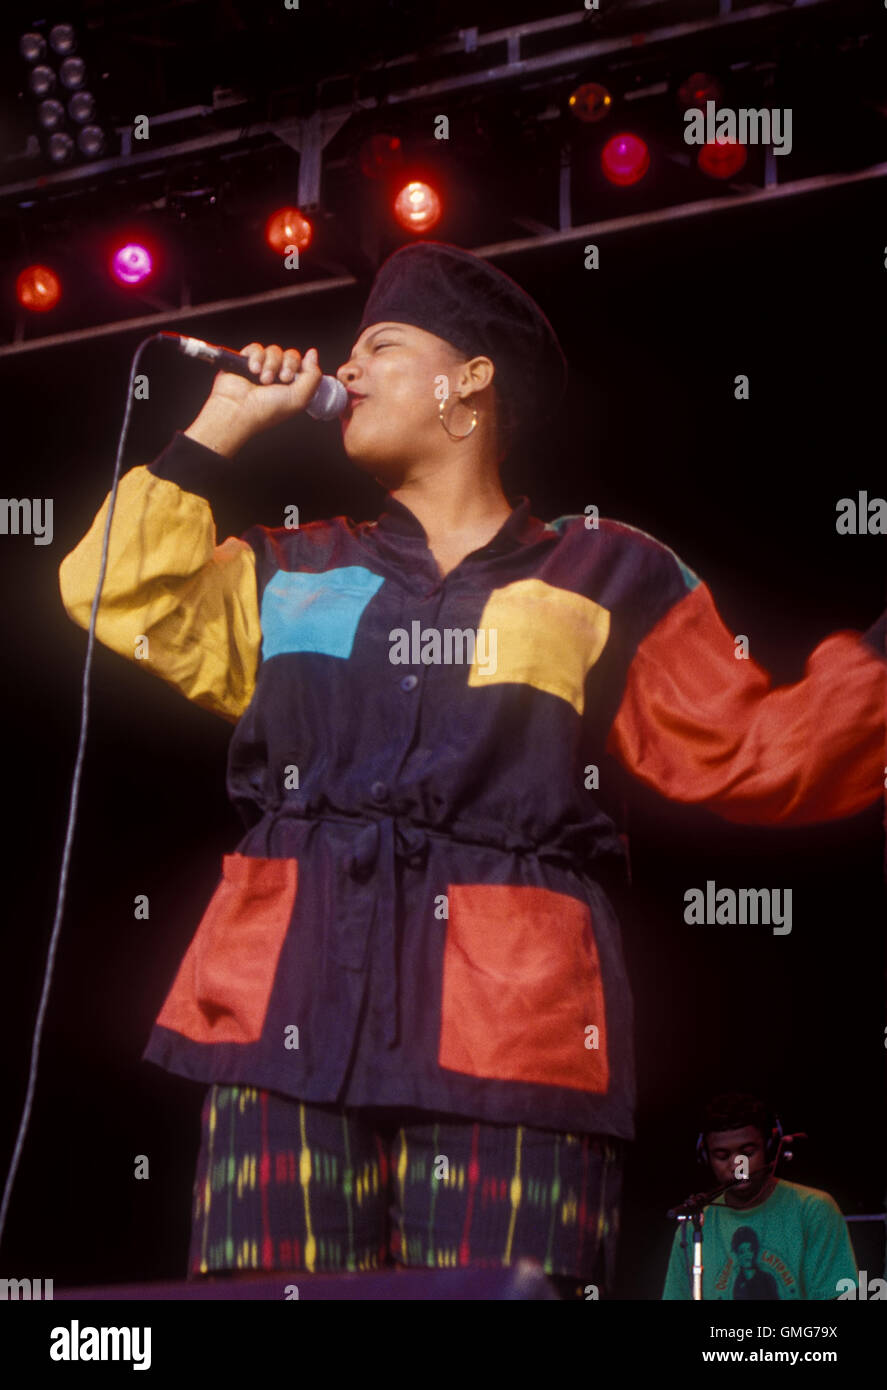 COSTA MESA, CA - OCTOBER 7, 1990 : Queen Latifah performing live at A Gathering Of The Tribes Music Festival on October 7, 1990 at the Pacific Amphitheatre in Costa Mesa, CA. Photo © Kevin Estrada / MediaPunch Stock Photo